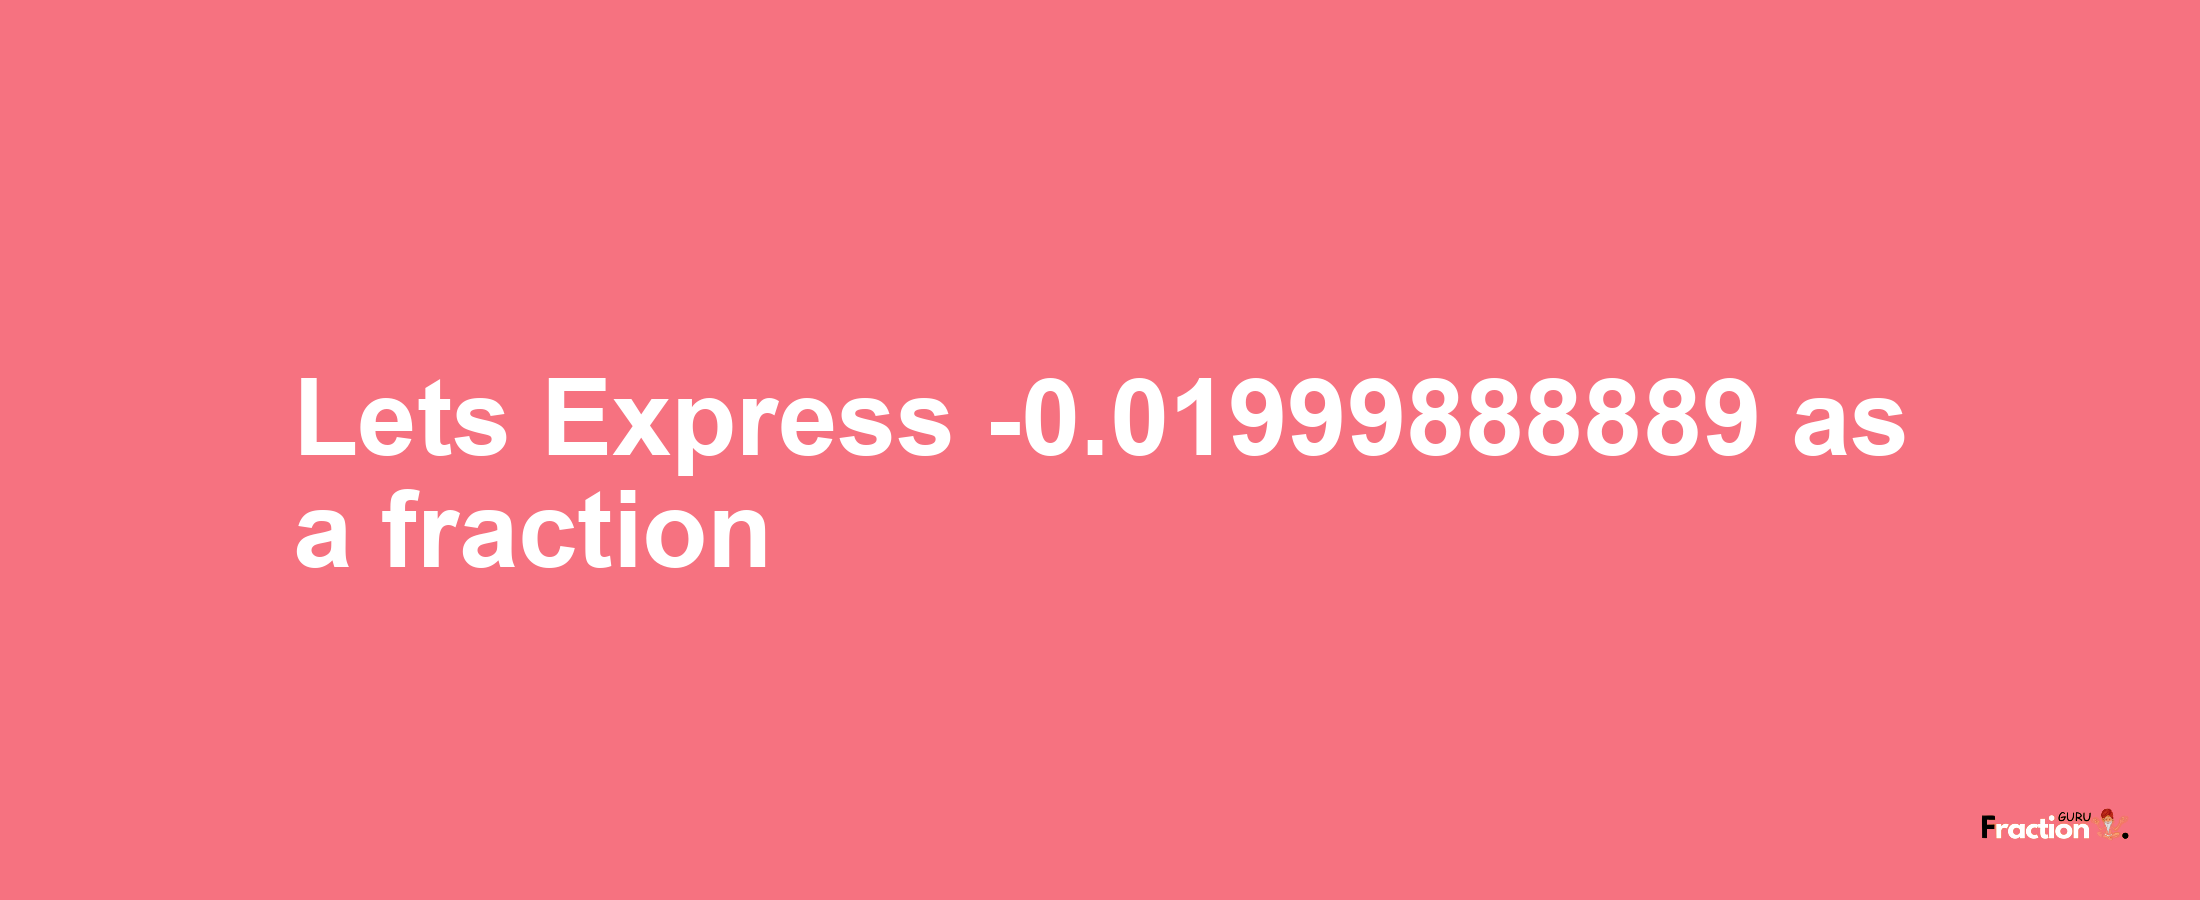 Lets Express -0.01999888889 as afraction